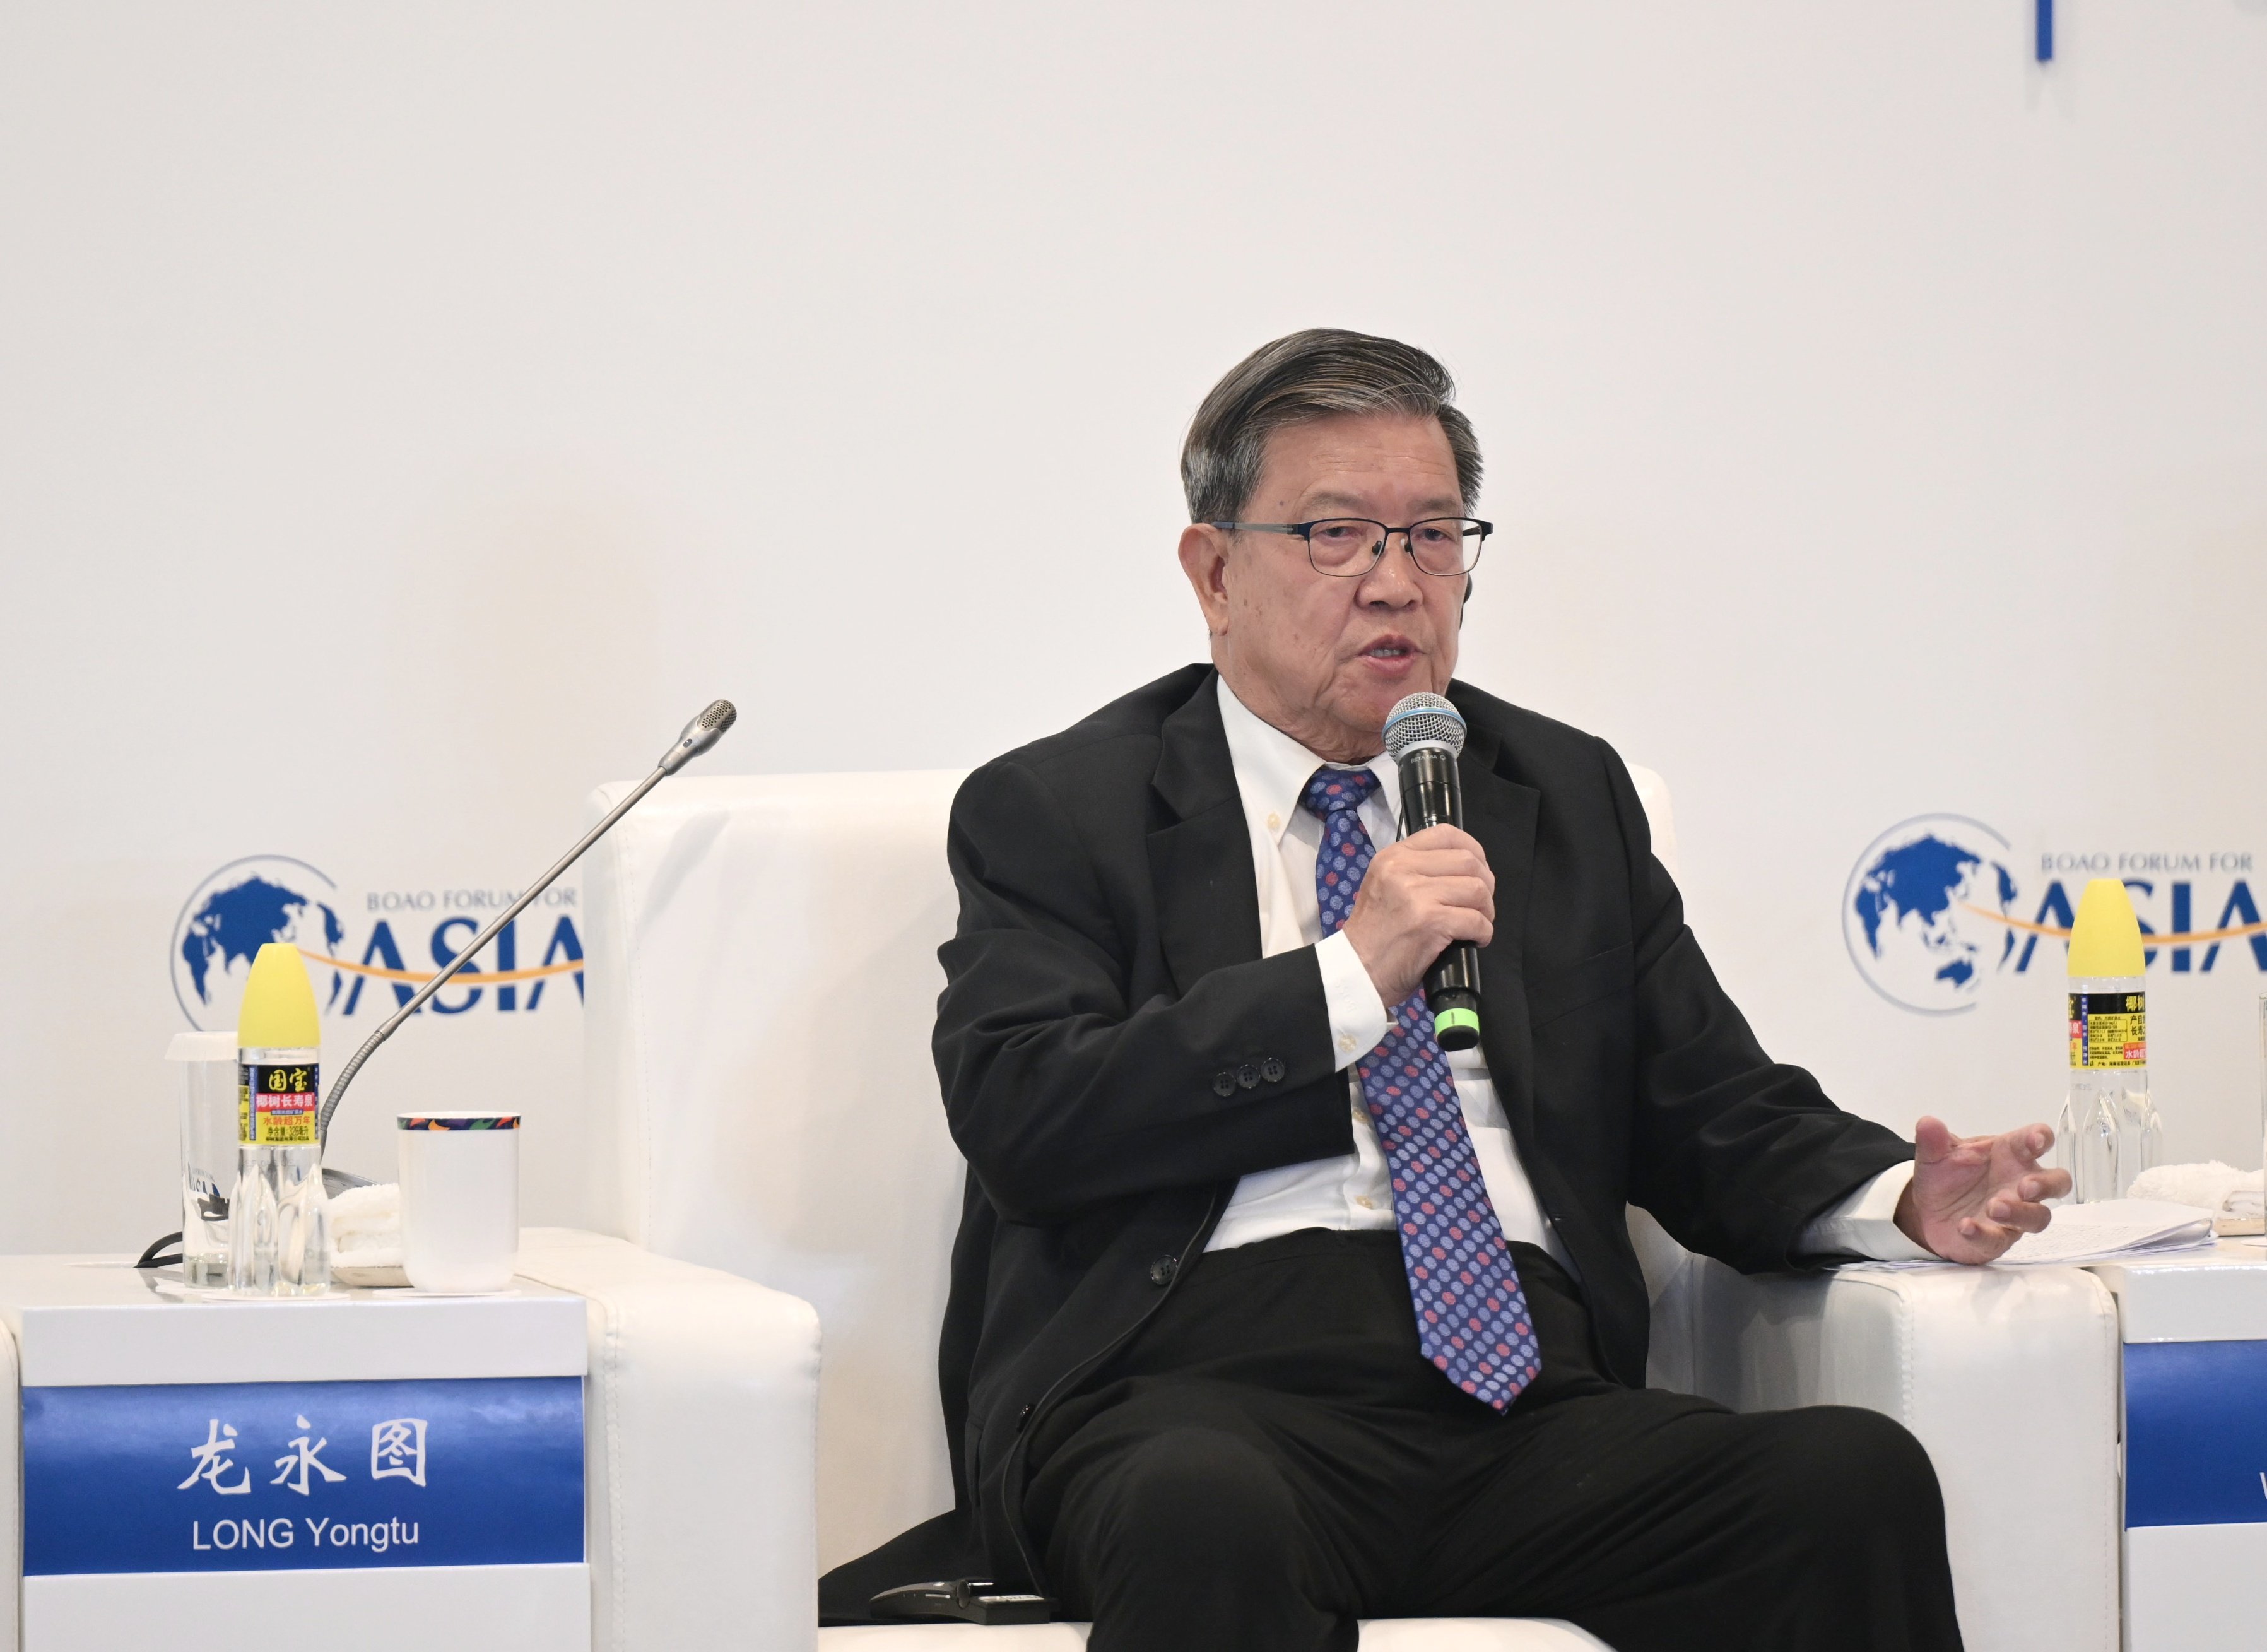 Former Chinese trade official Long Yongtu speaks at the Boao Forum for Asia on Tuesday. He accused Washington of “dismantling the system” of trade that it helped build. Photo: Getty Images